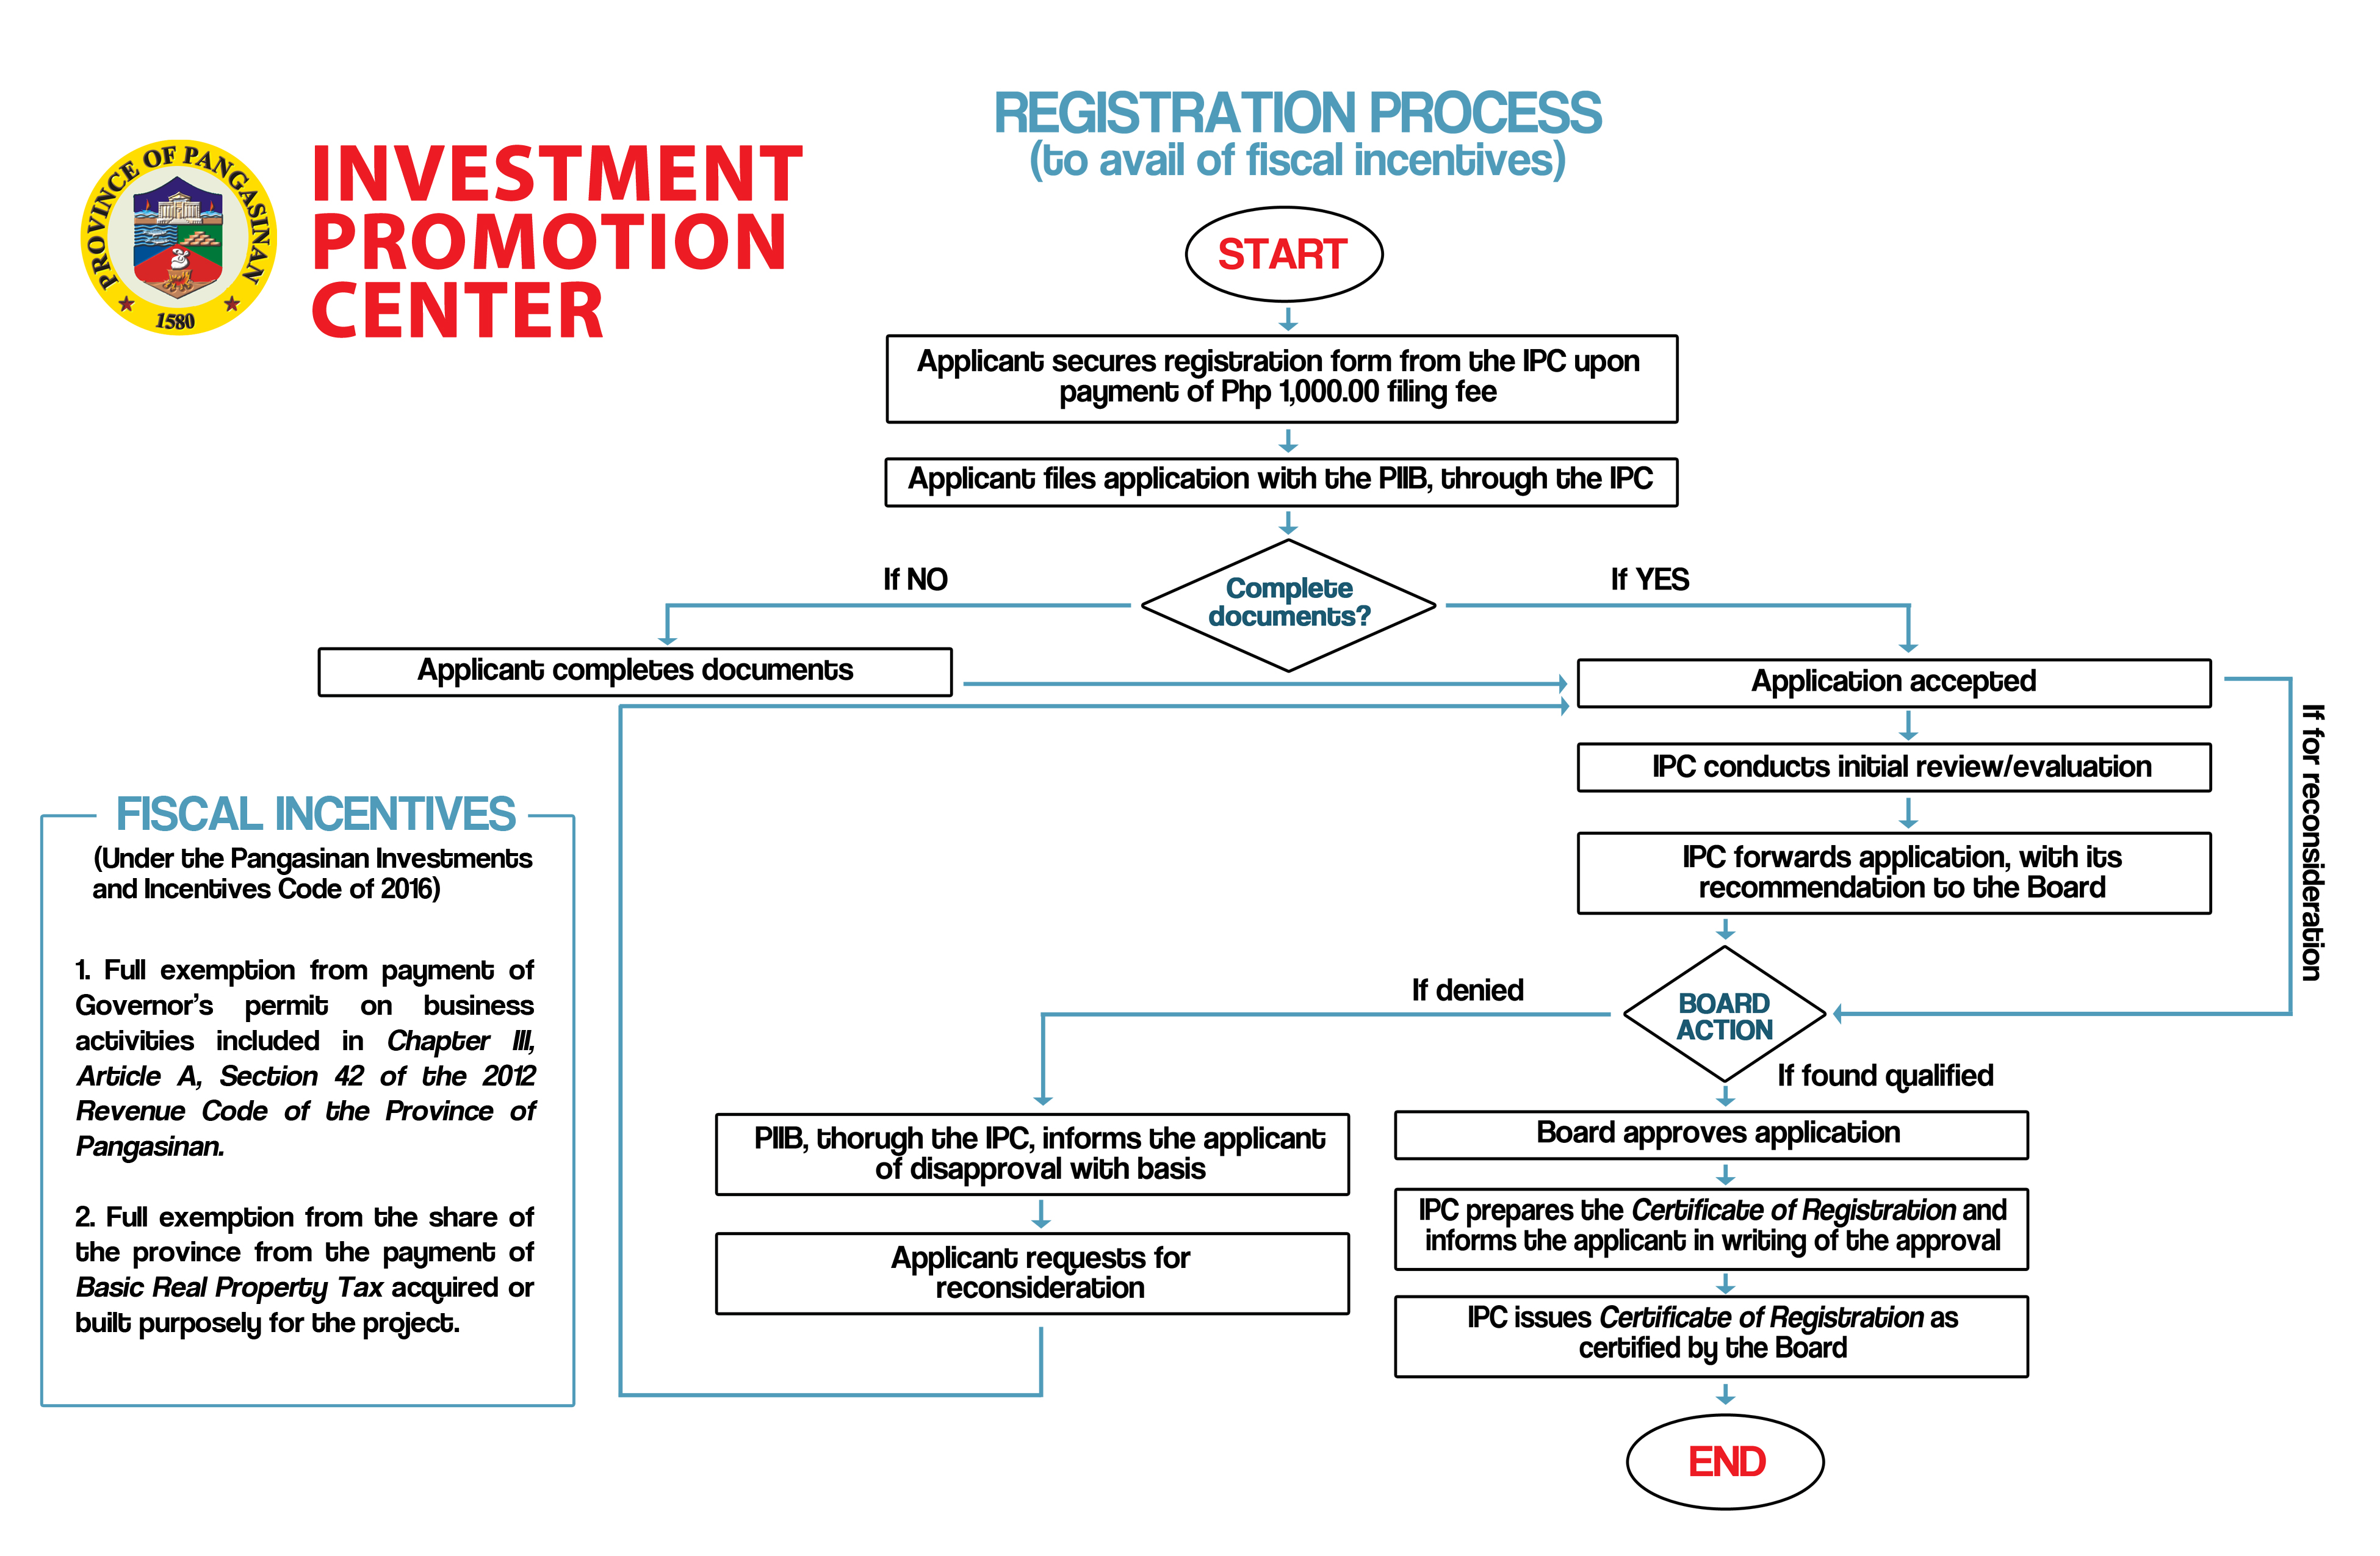 investment promotion center registration process long coupon